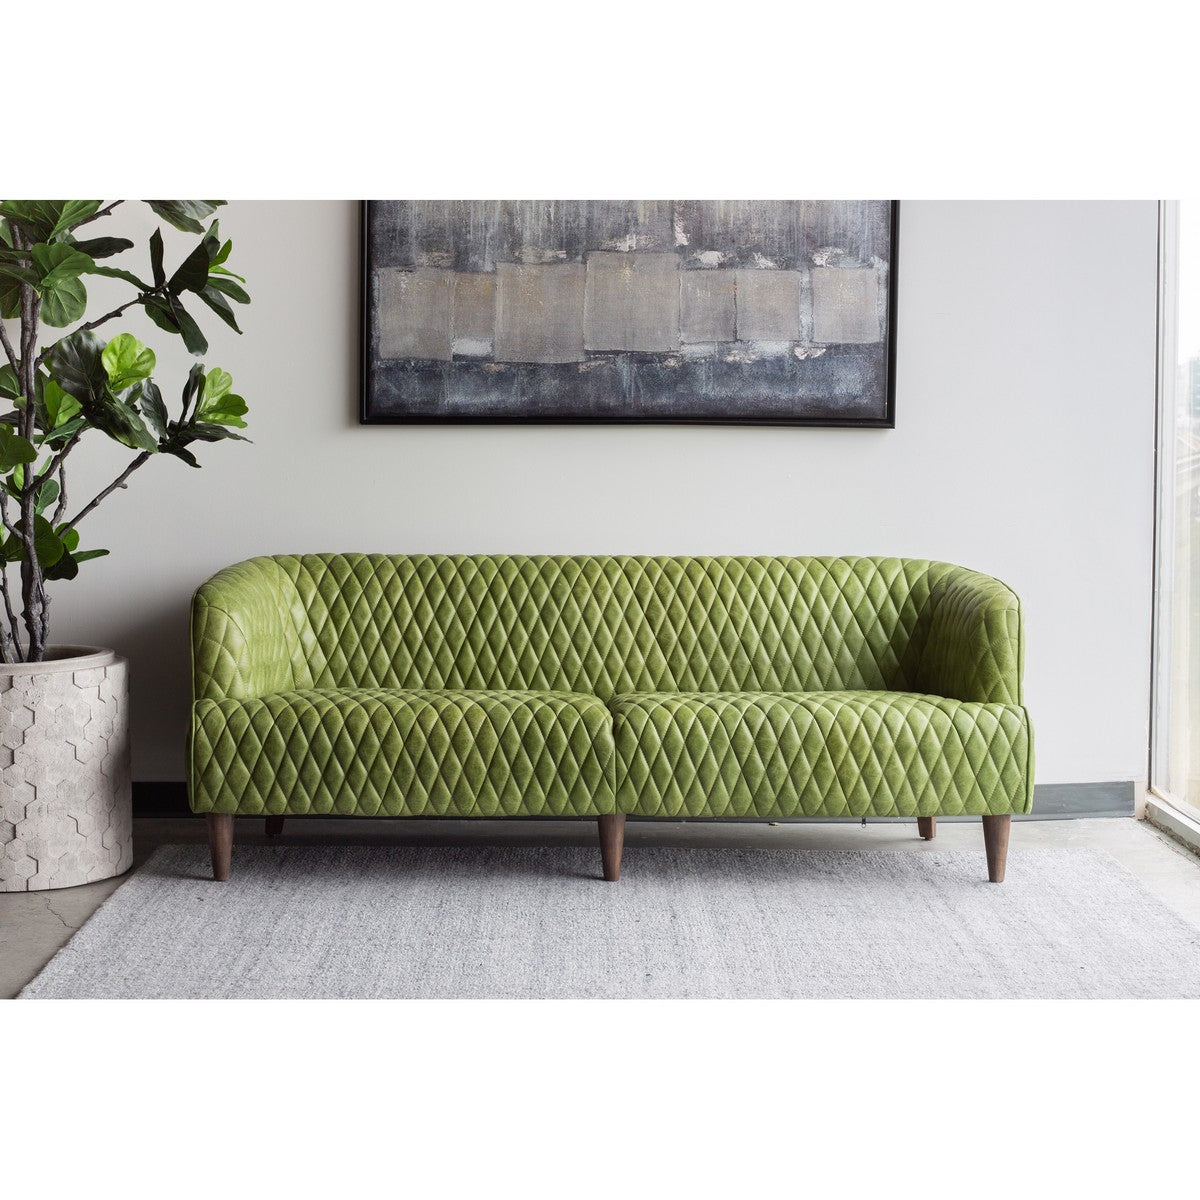 Moe's Home Collection Magdelan Tufted Leather Sofa Emerald - PK-1077-27 - Moe's Home Collection - Sofas - Minimal And Modern - 1